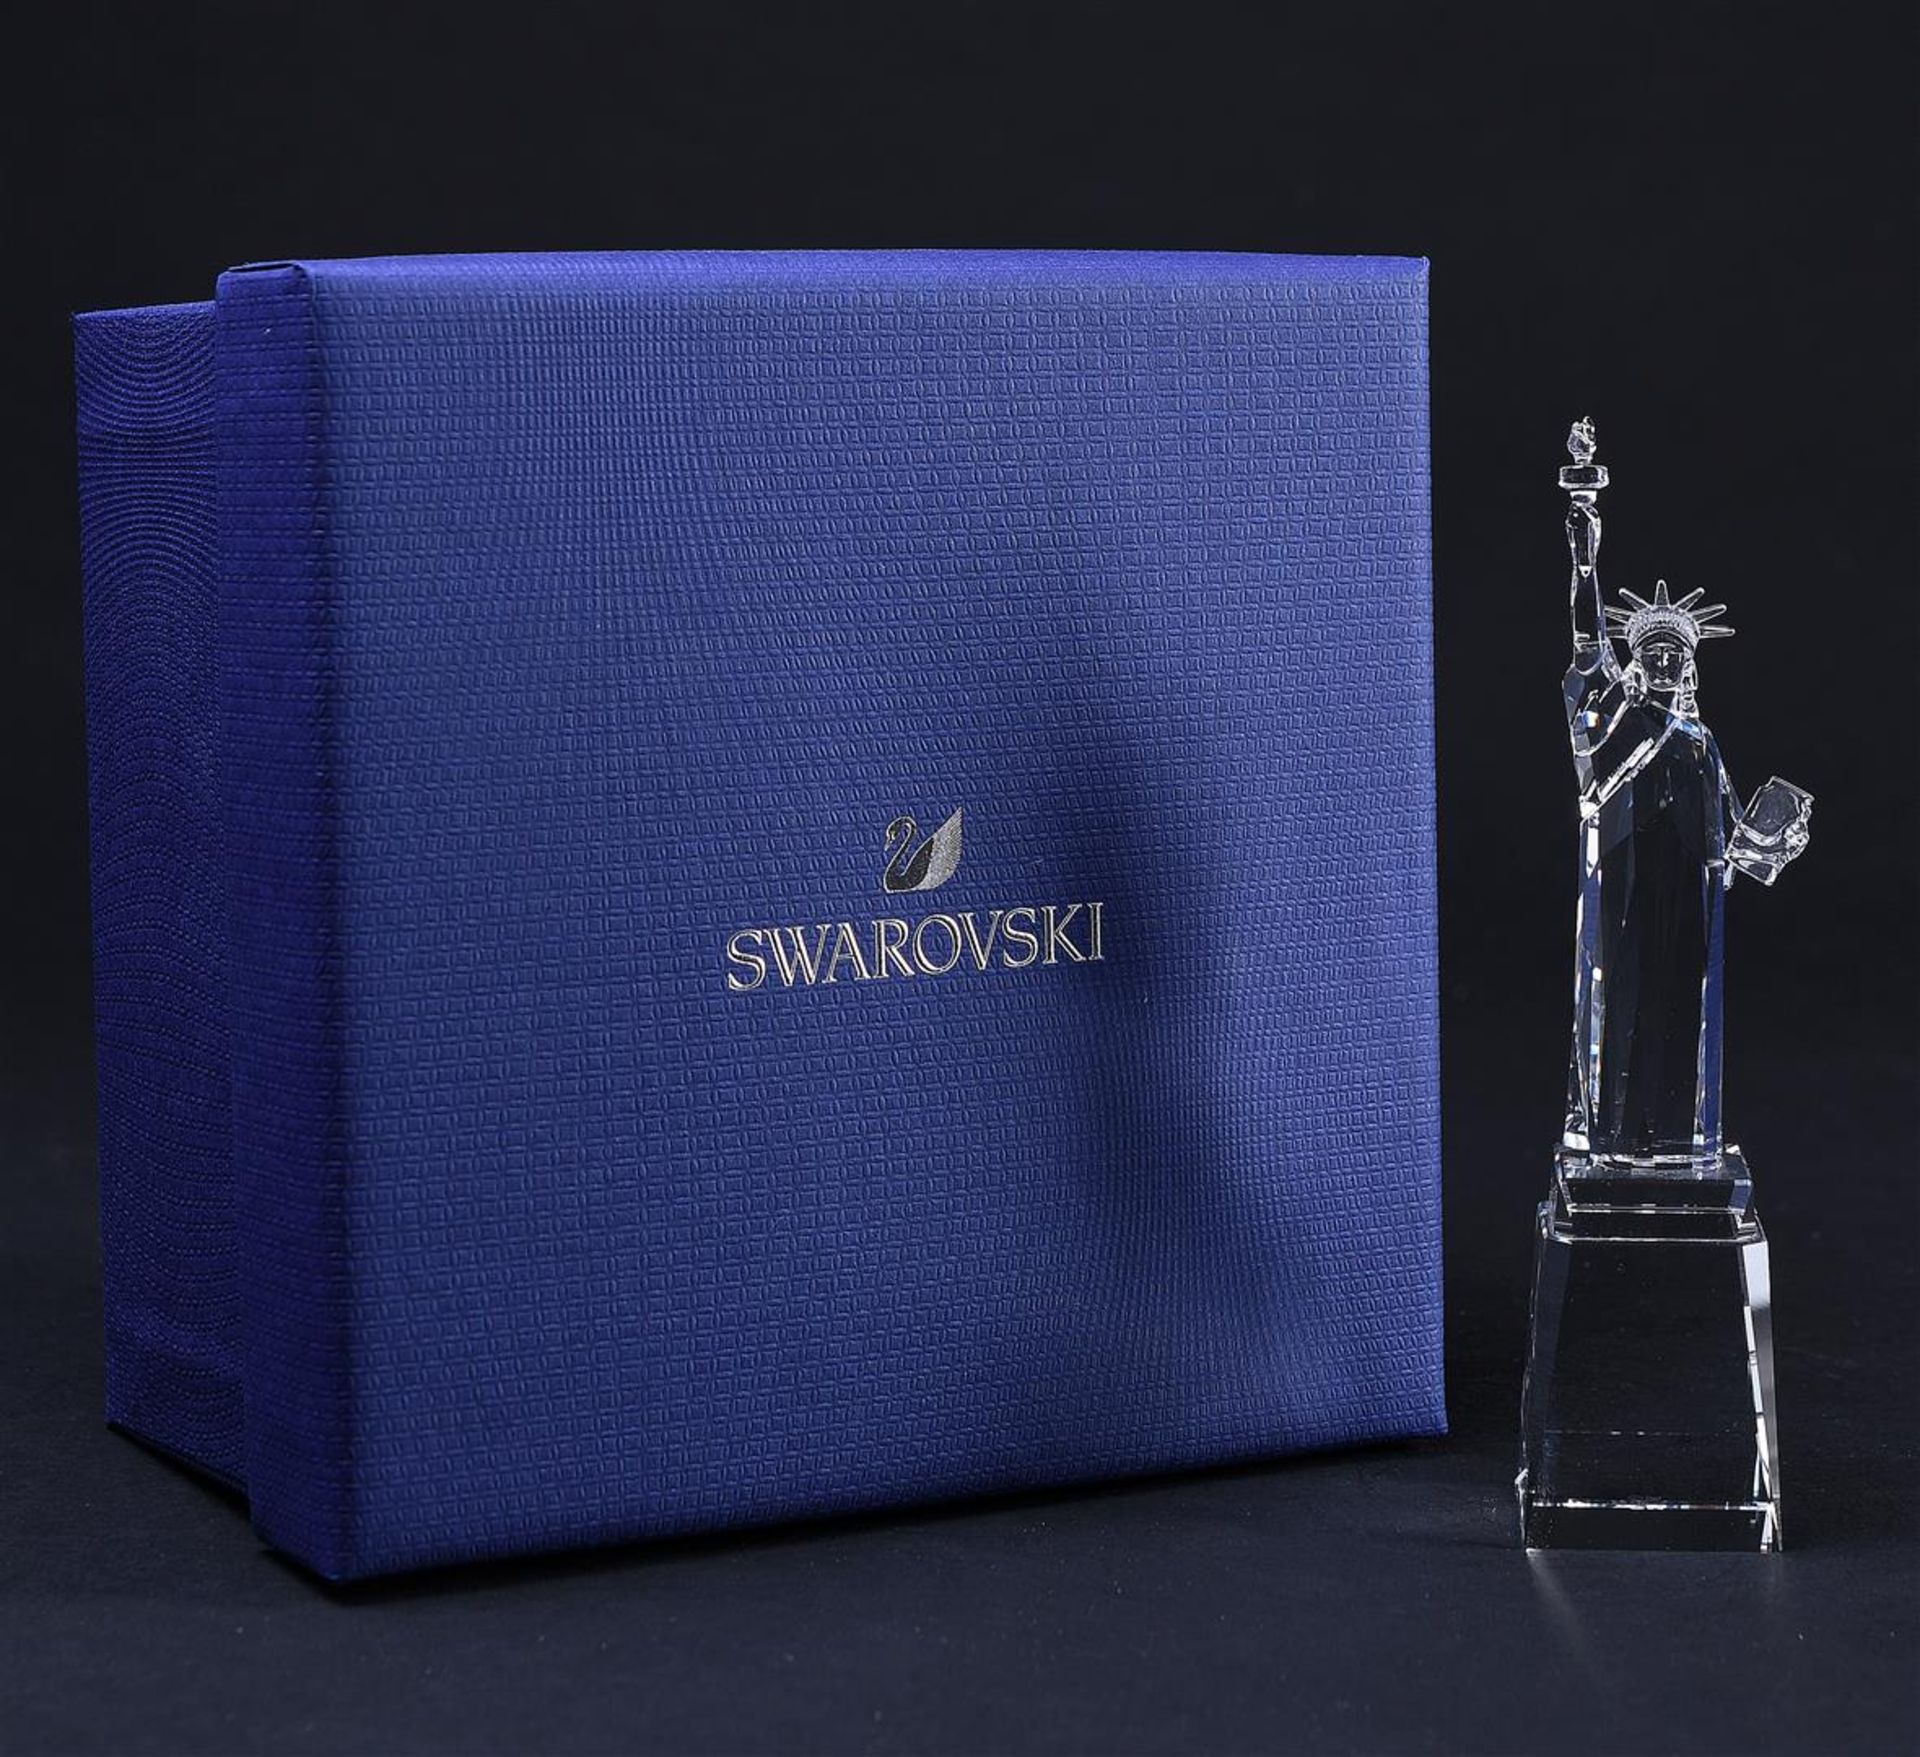 Swarovski, Statue of Liberty Year of issue 2019, 5428011. Includes original box.
3.1 x 3.1 x 13.6 cm - Image 4 of 4